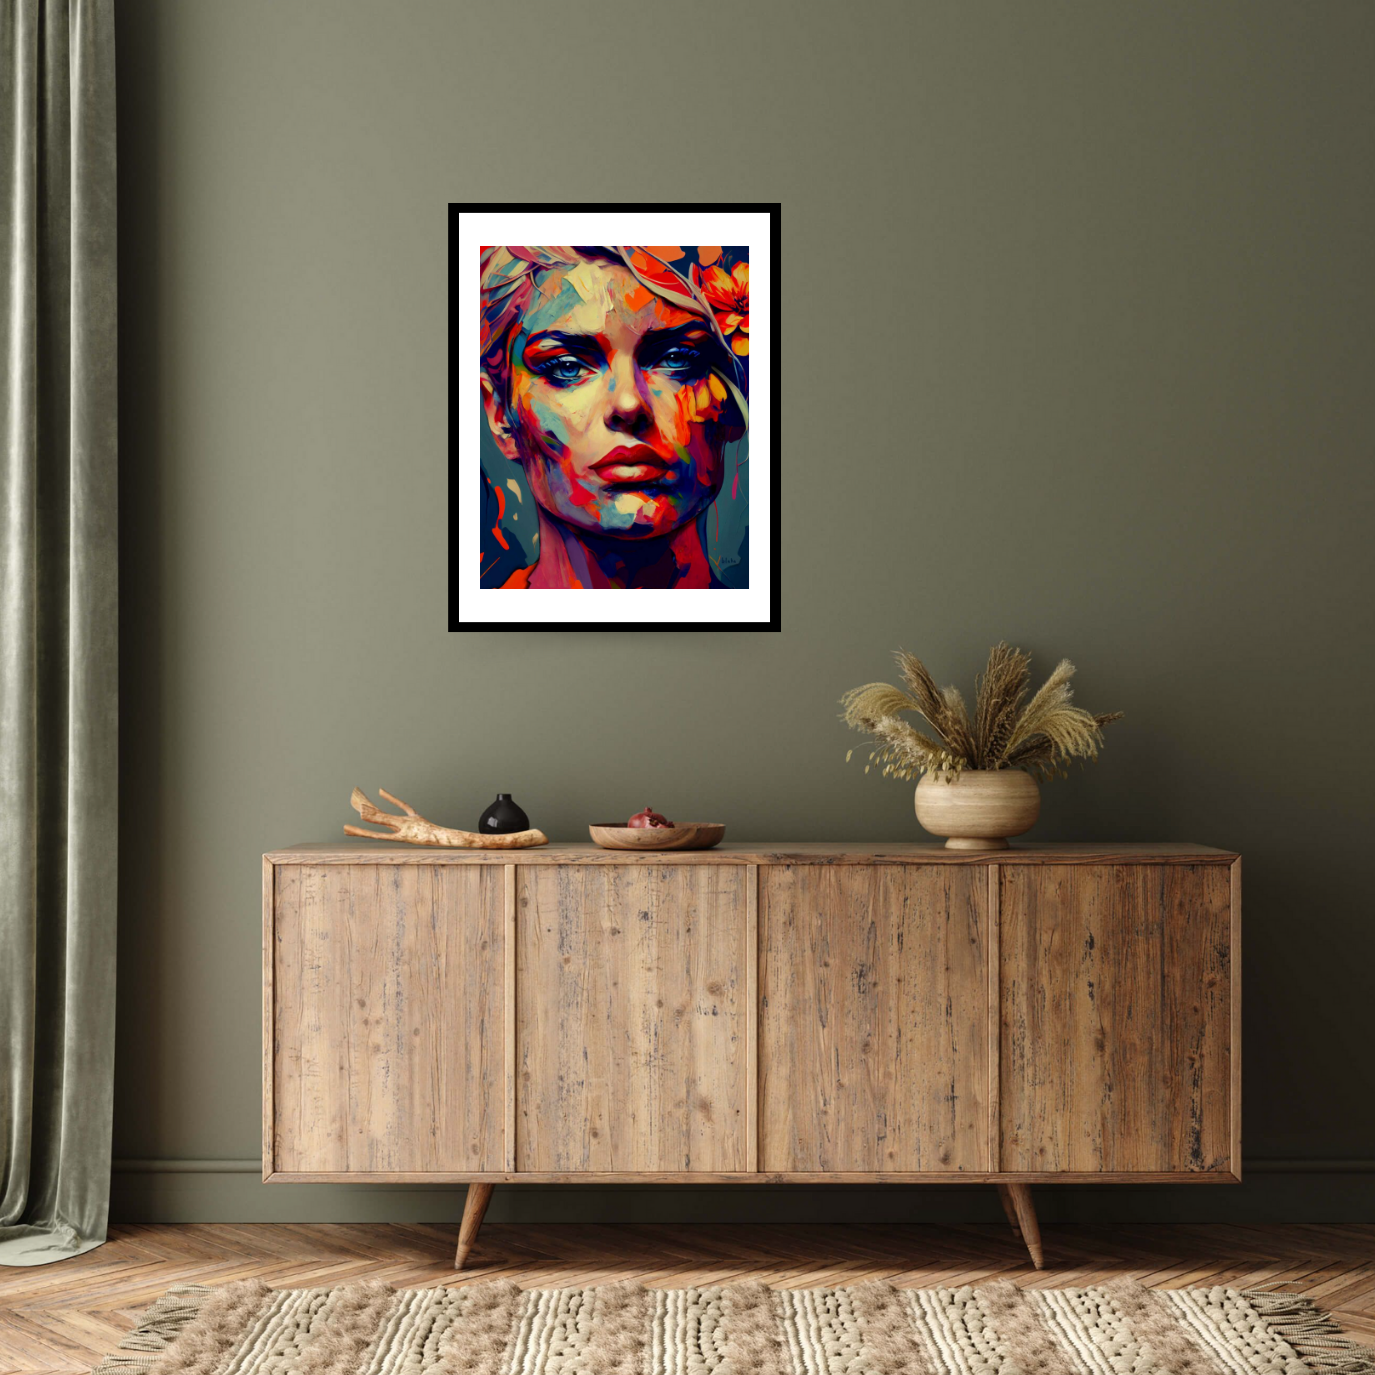 Black framed print 'No Turning Back’ by Blake Munch: A woman with piercing blue eyes faces the viewer, her face covered in an array of warm and cool toned brushstrokes.